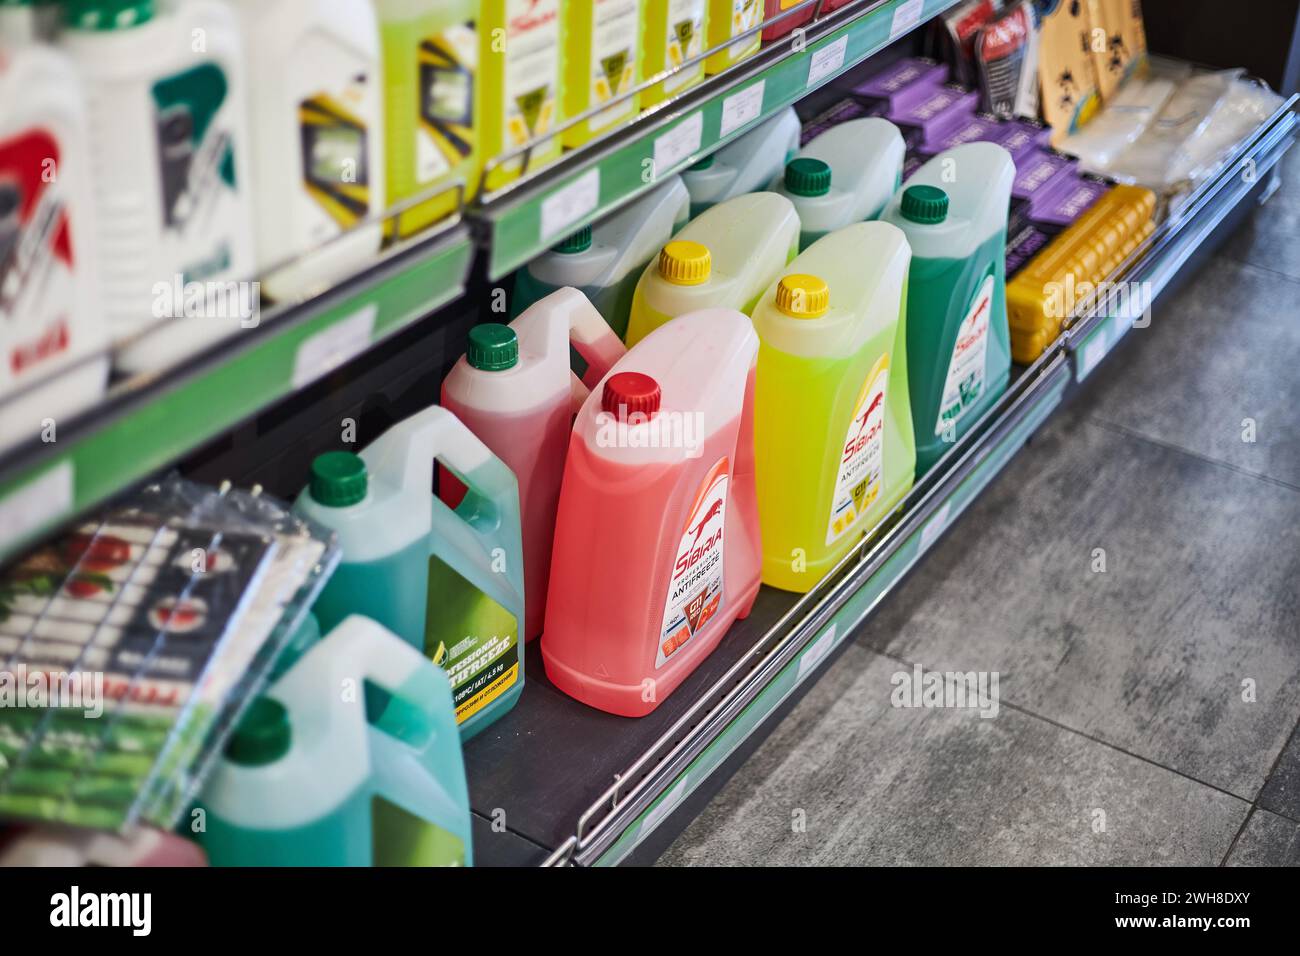 Showcase with automotive products at gas station store. Plastic cans with antifreeze in different colors: pink, yellow, green. Automobile goods for ca Stock Photo